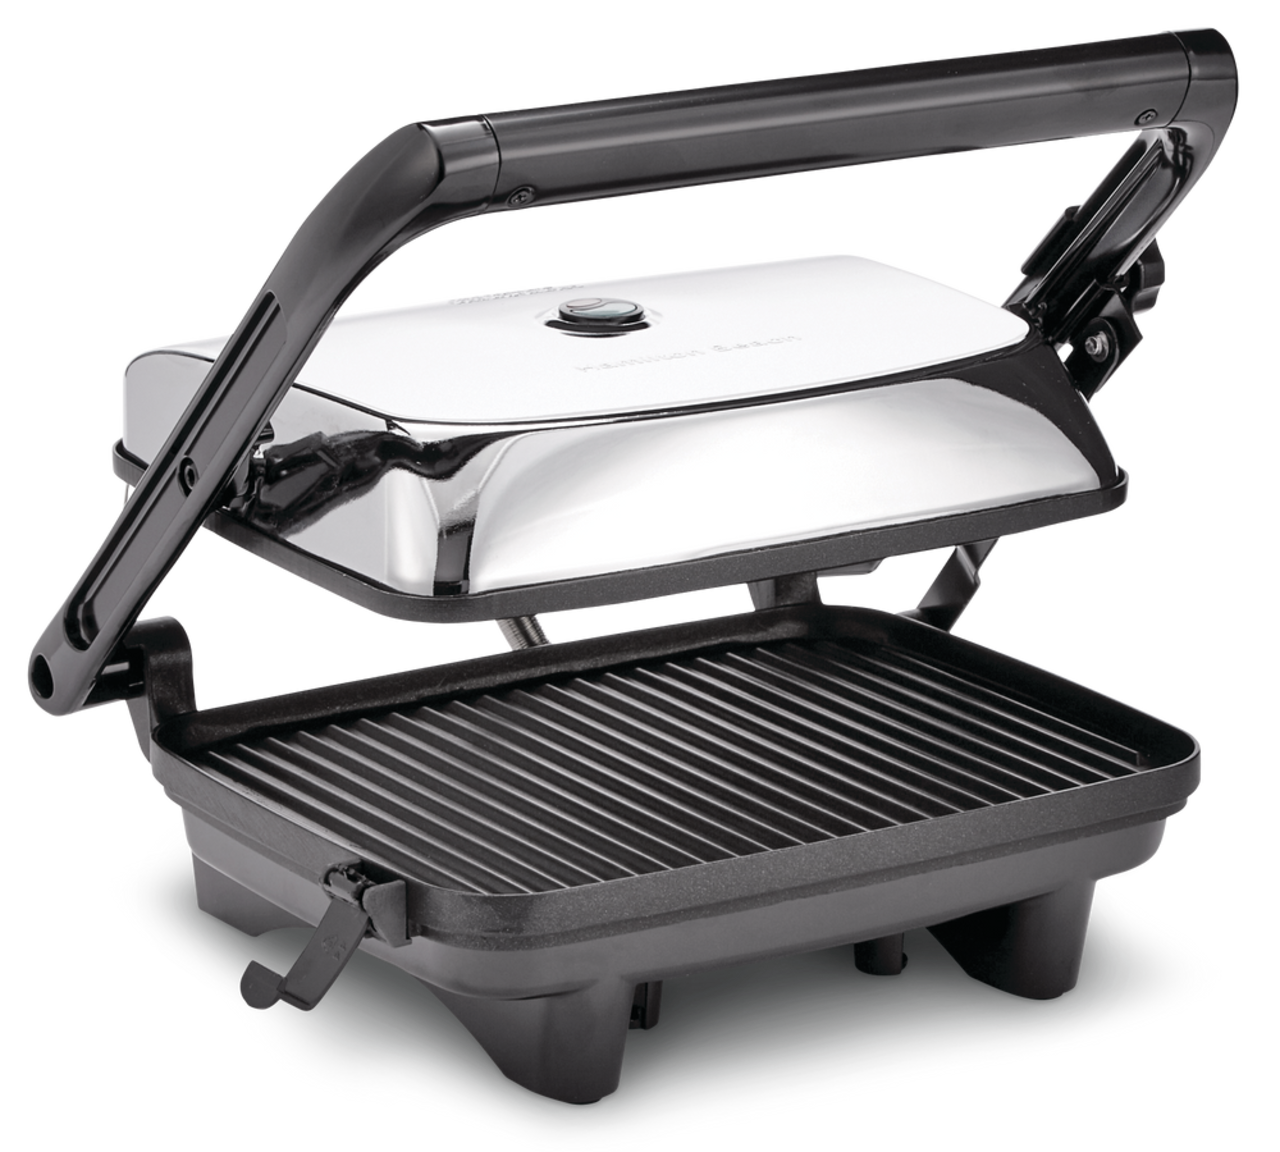 https://media-www.canadiantire.ca/product/living/kitchen/kitchen-appliances/0431196/hamilton-beach-panini-press-6bc8f6f1-f532-43d7-8b6c-0698eac0f95a.png?imdensity=1&imwidth=640&impolicy=mZoom